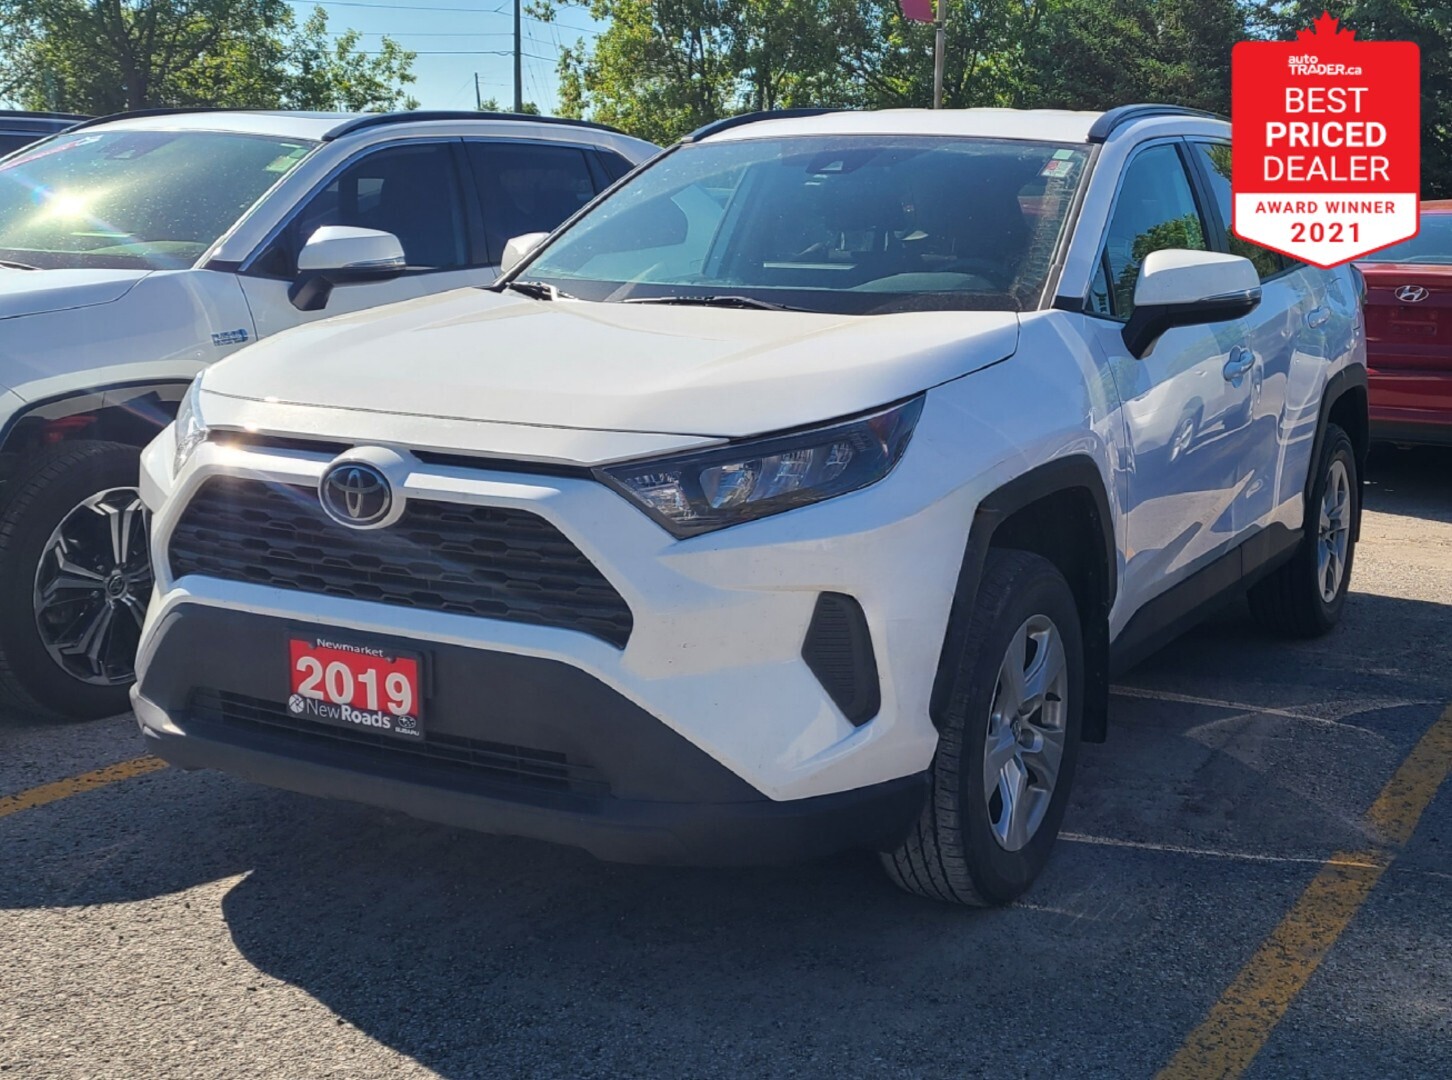 2019 Toyota RAV4 LE, 19226 kms below market average!, Locally Owned